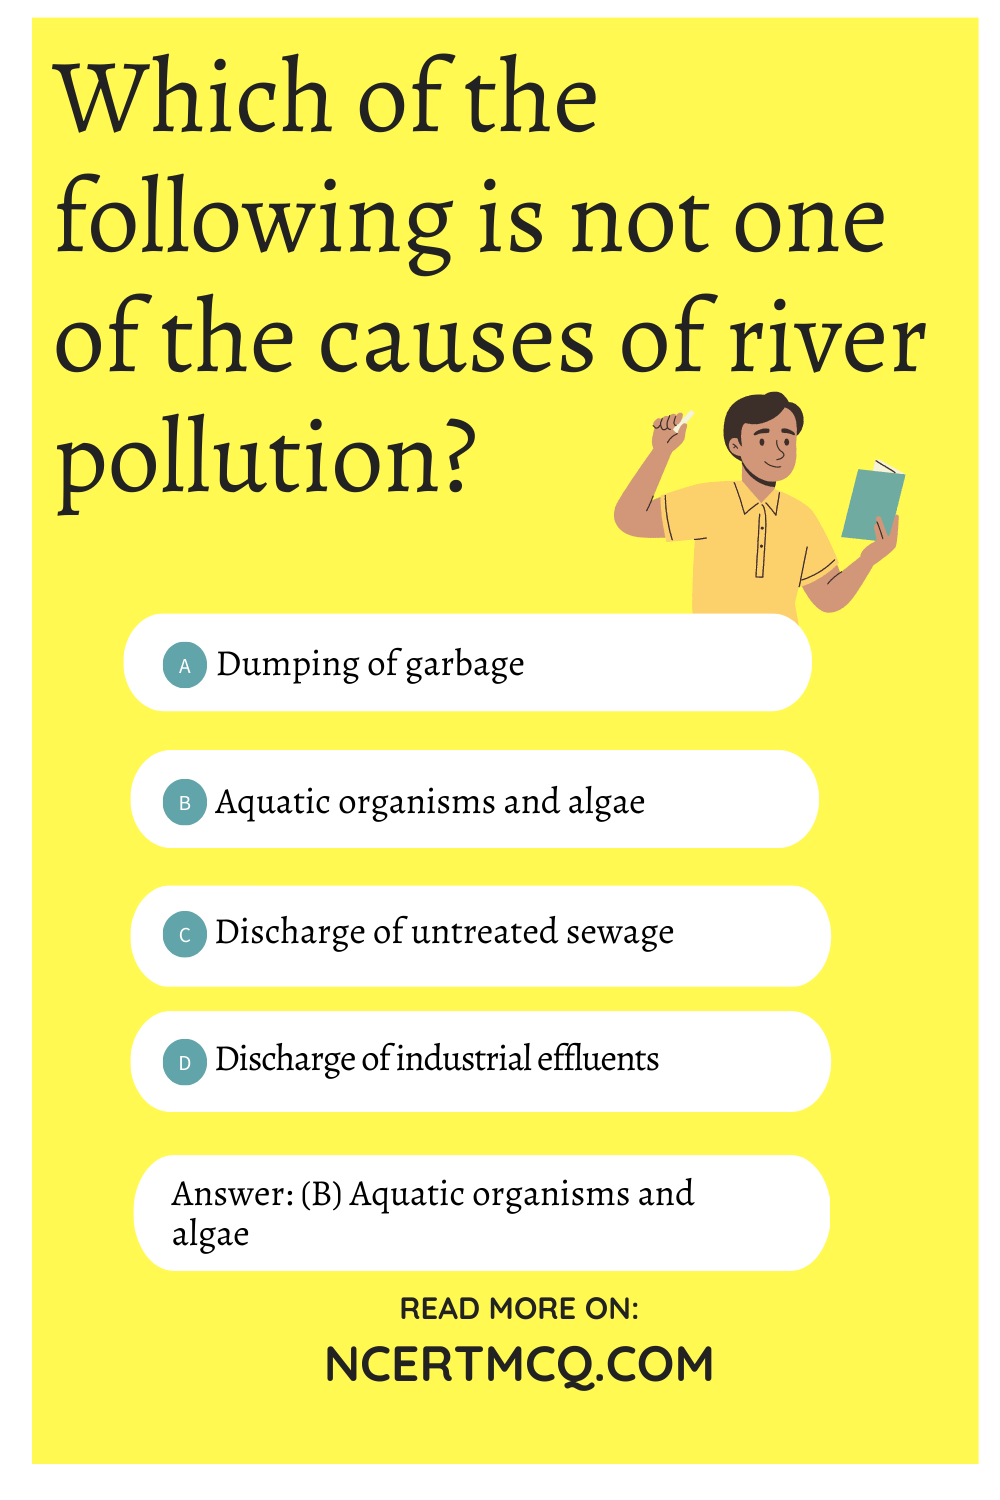 Which of the following is not one of the causes of river pollution?